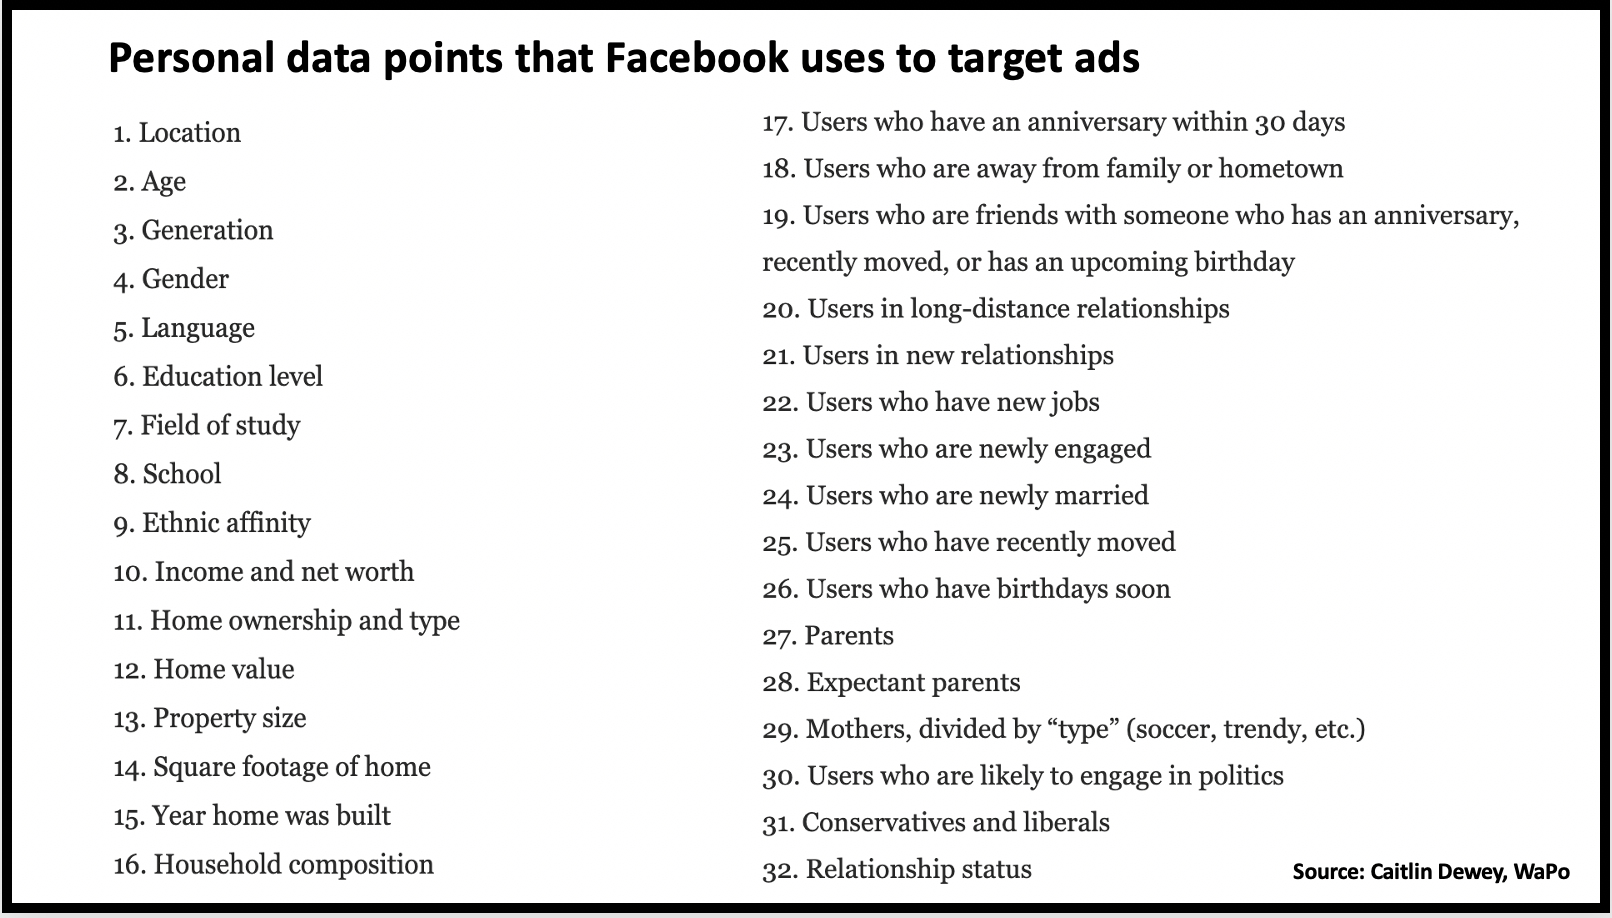 Personal data points that Facebook uses to target ads